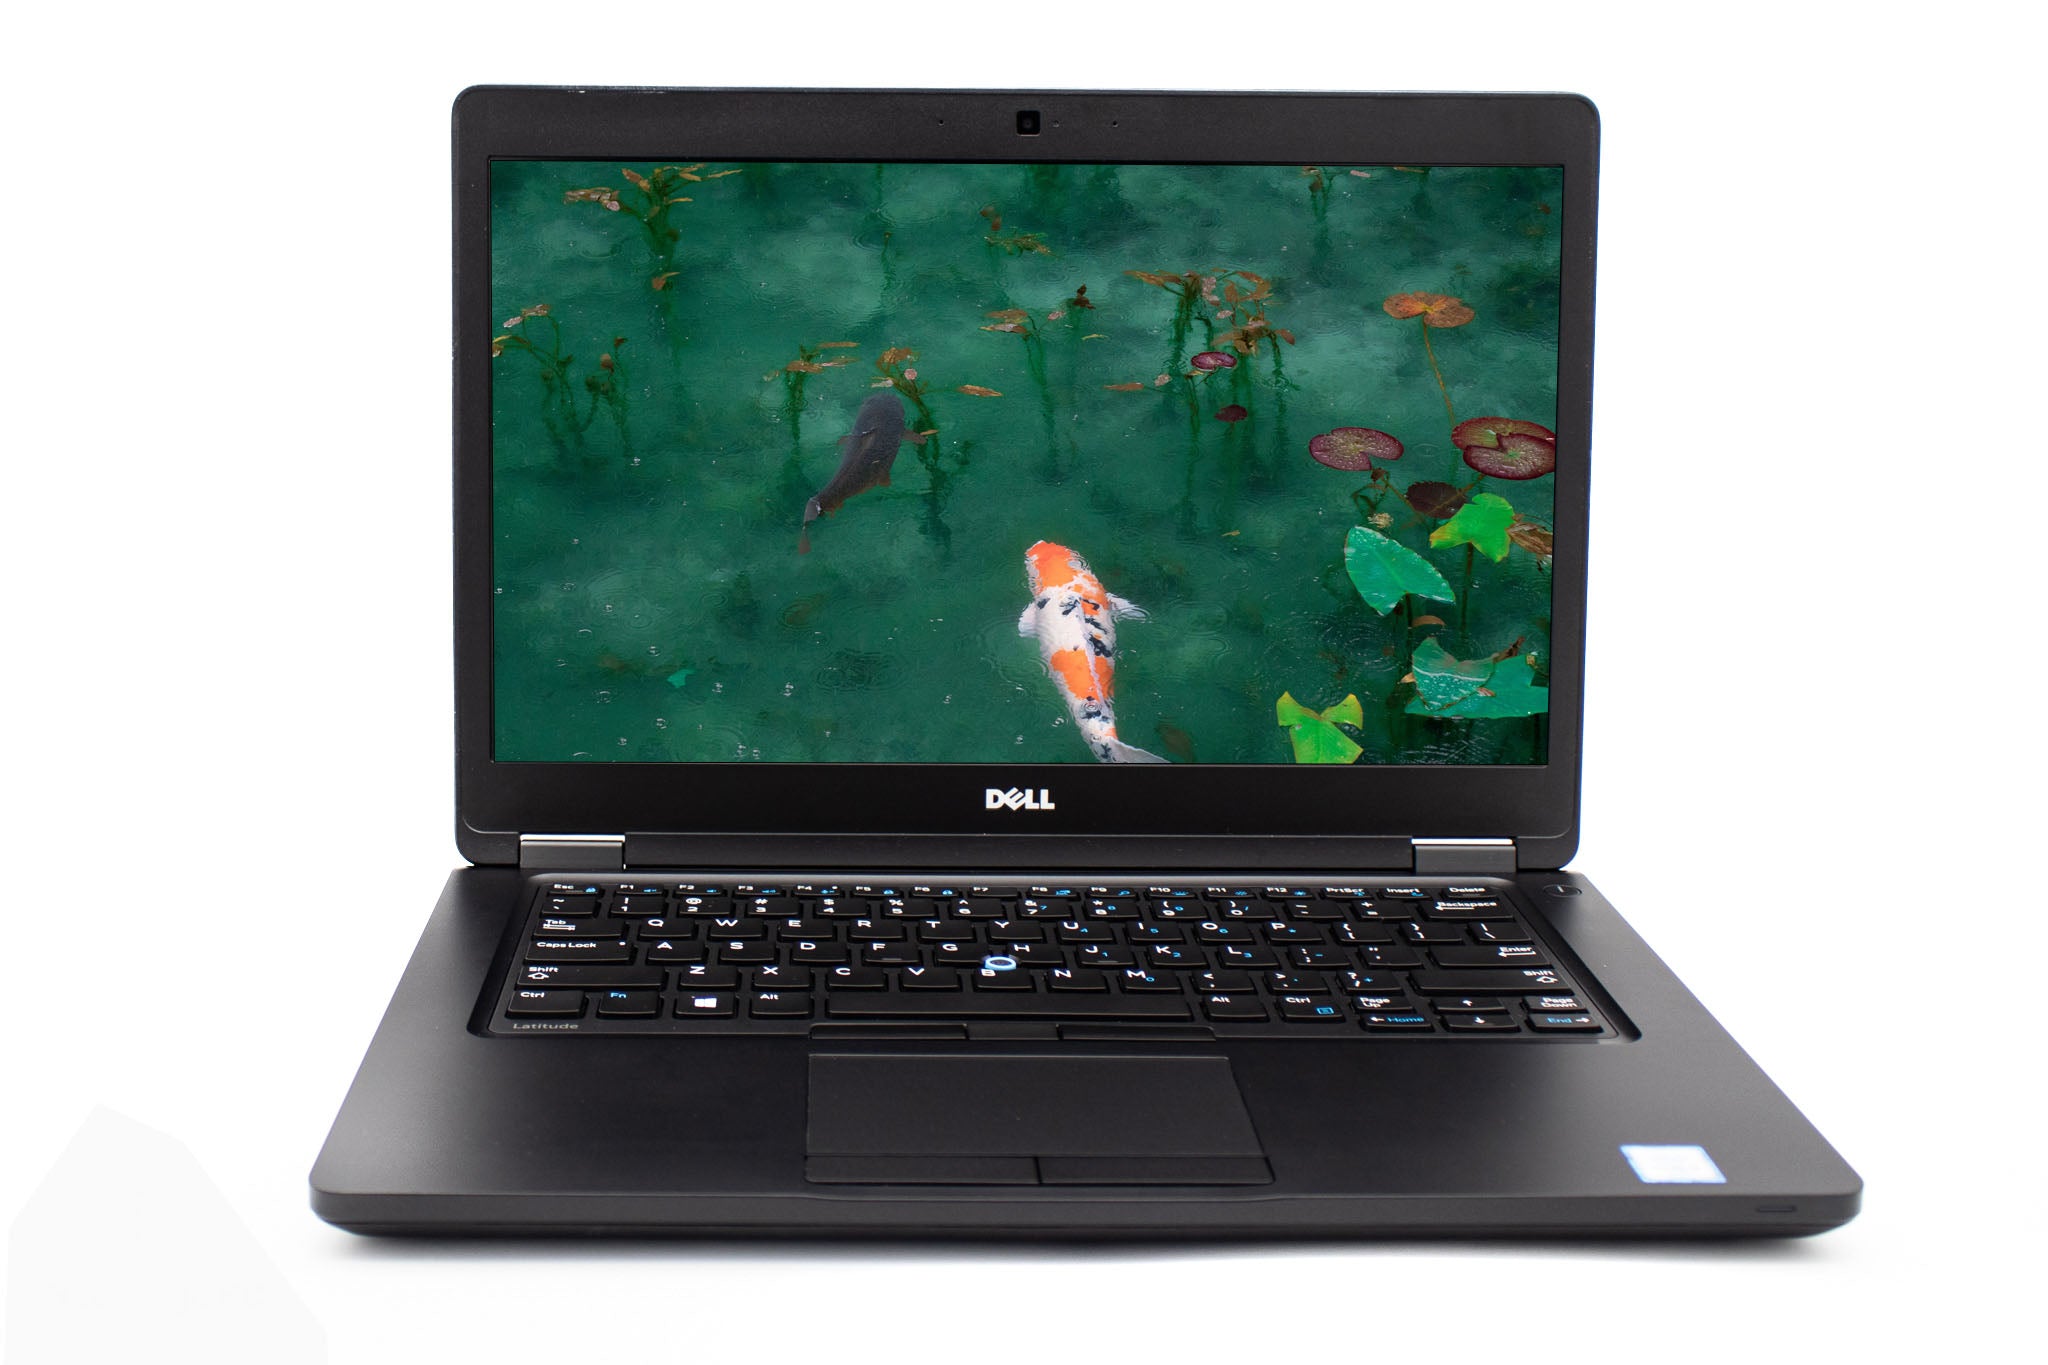 Refurbished Dell Latitude E5480 Laptop Computer, Intel Core i5, 256GB Solid State Hard Drive, 8GB Ram, Windows 11 Operating System One Year Warranty